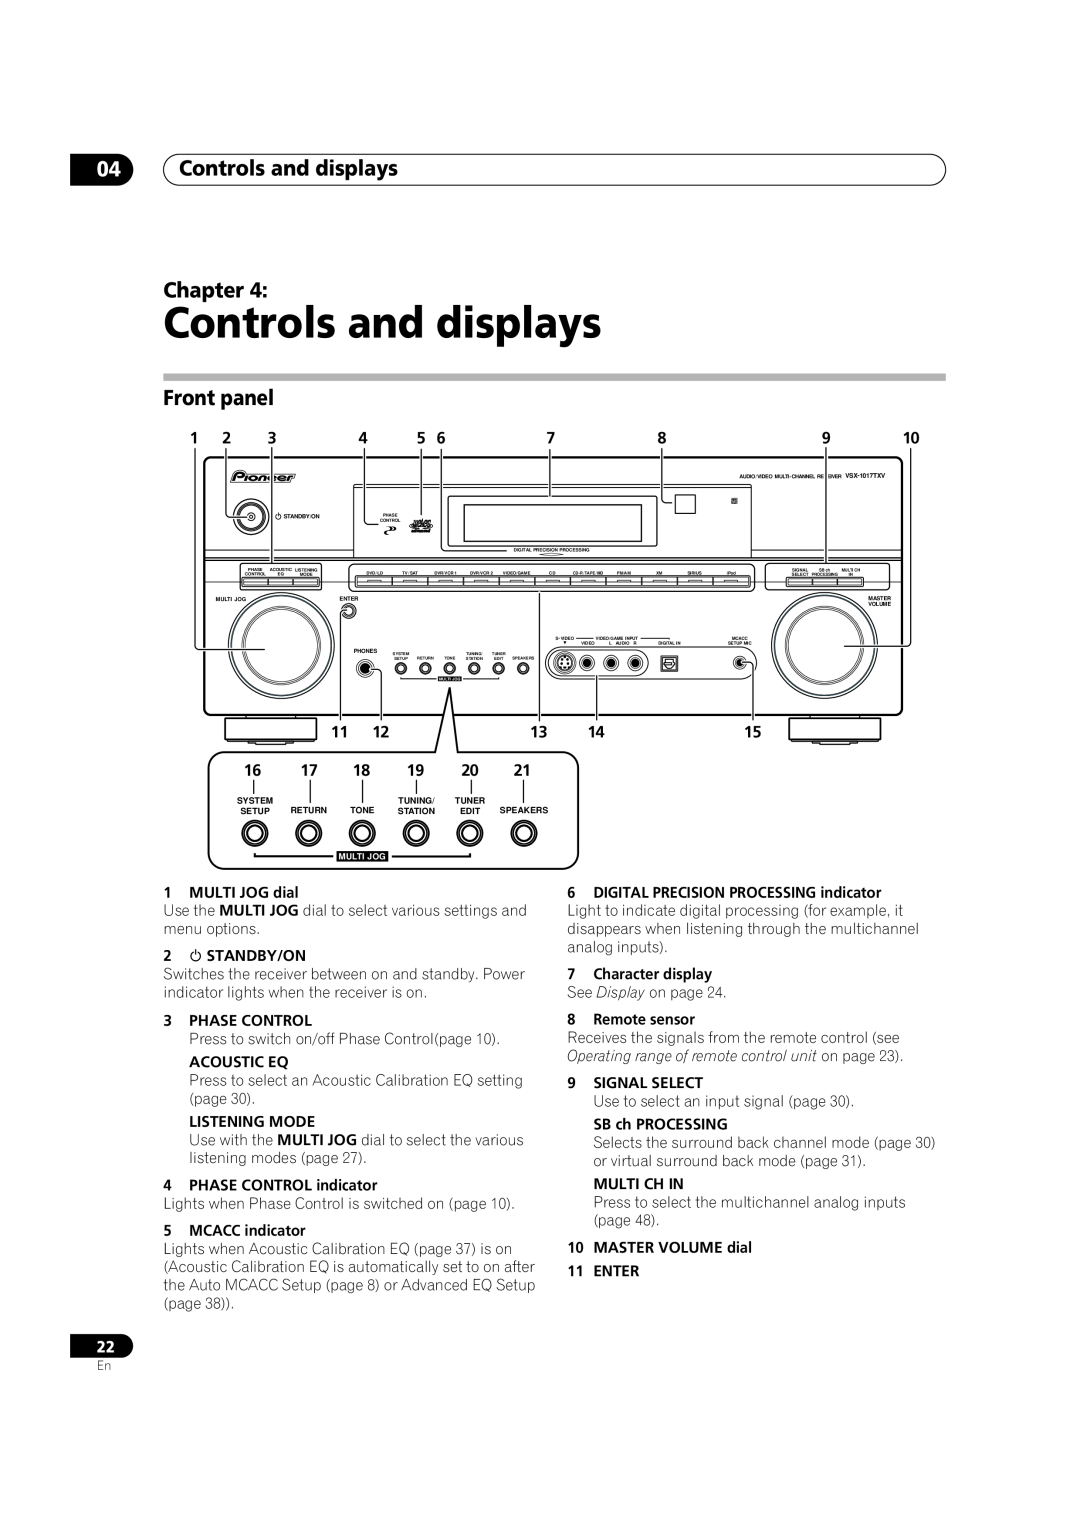 Pioneer VSX1017TXV manual 04Controls and displays Chapter, Front panel 